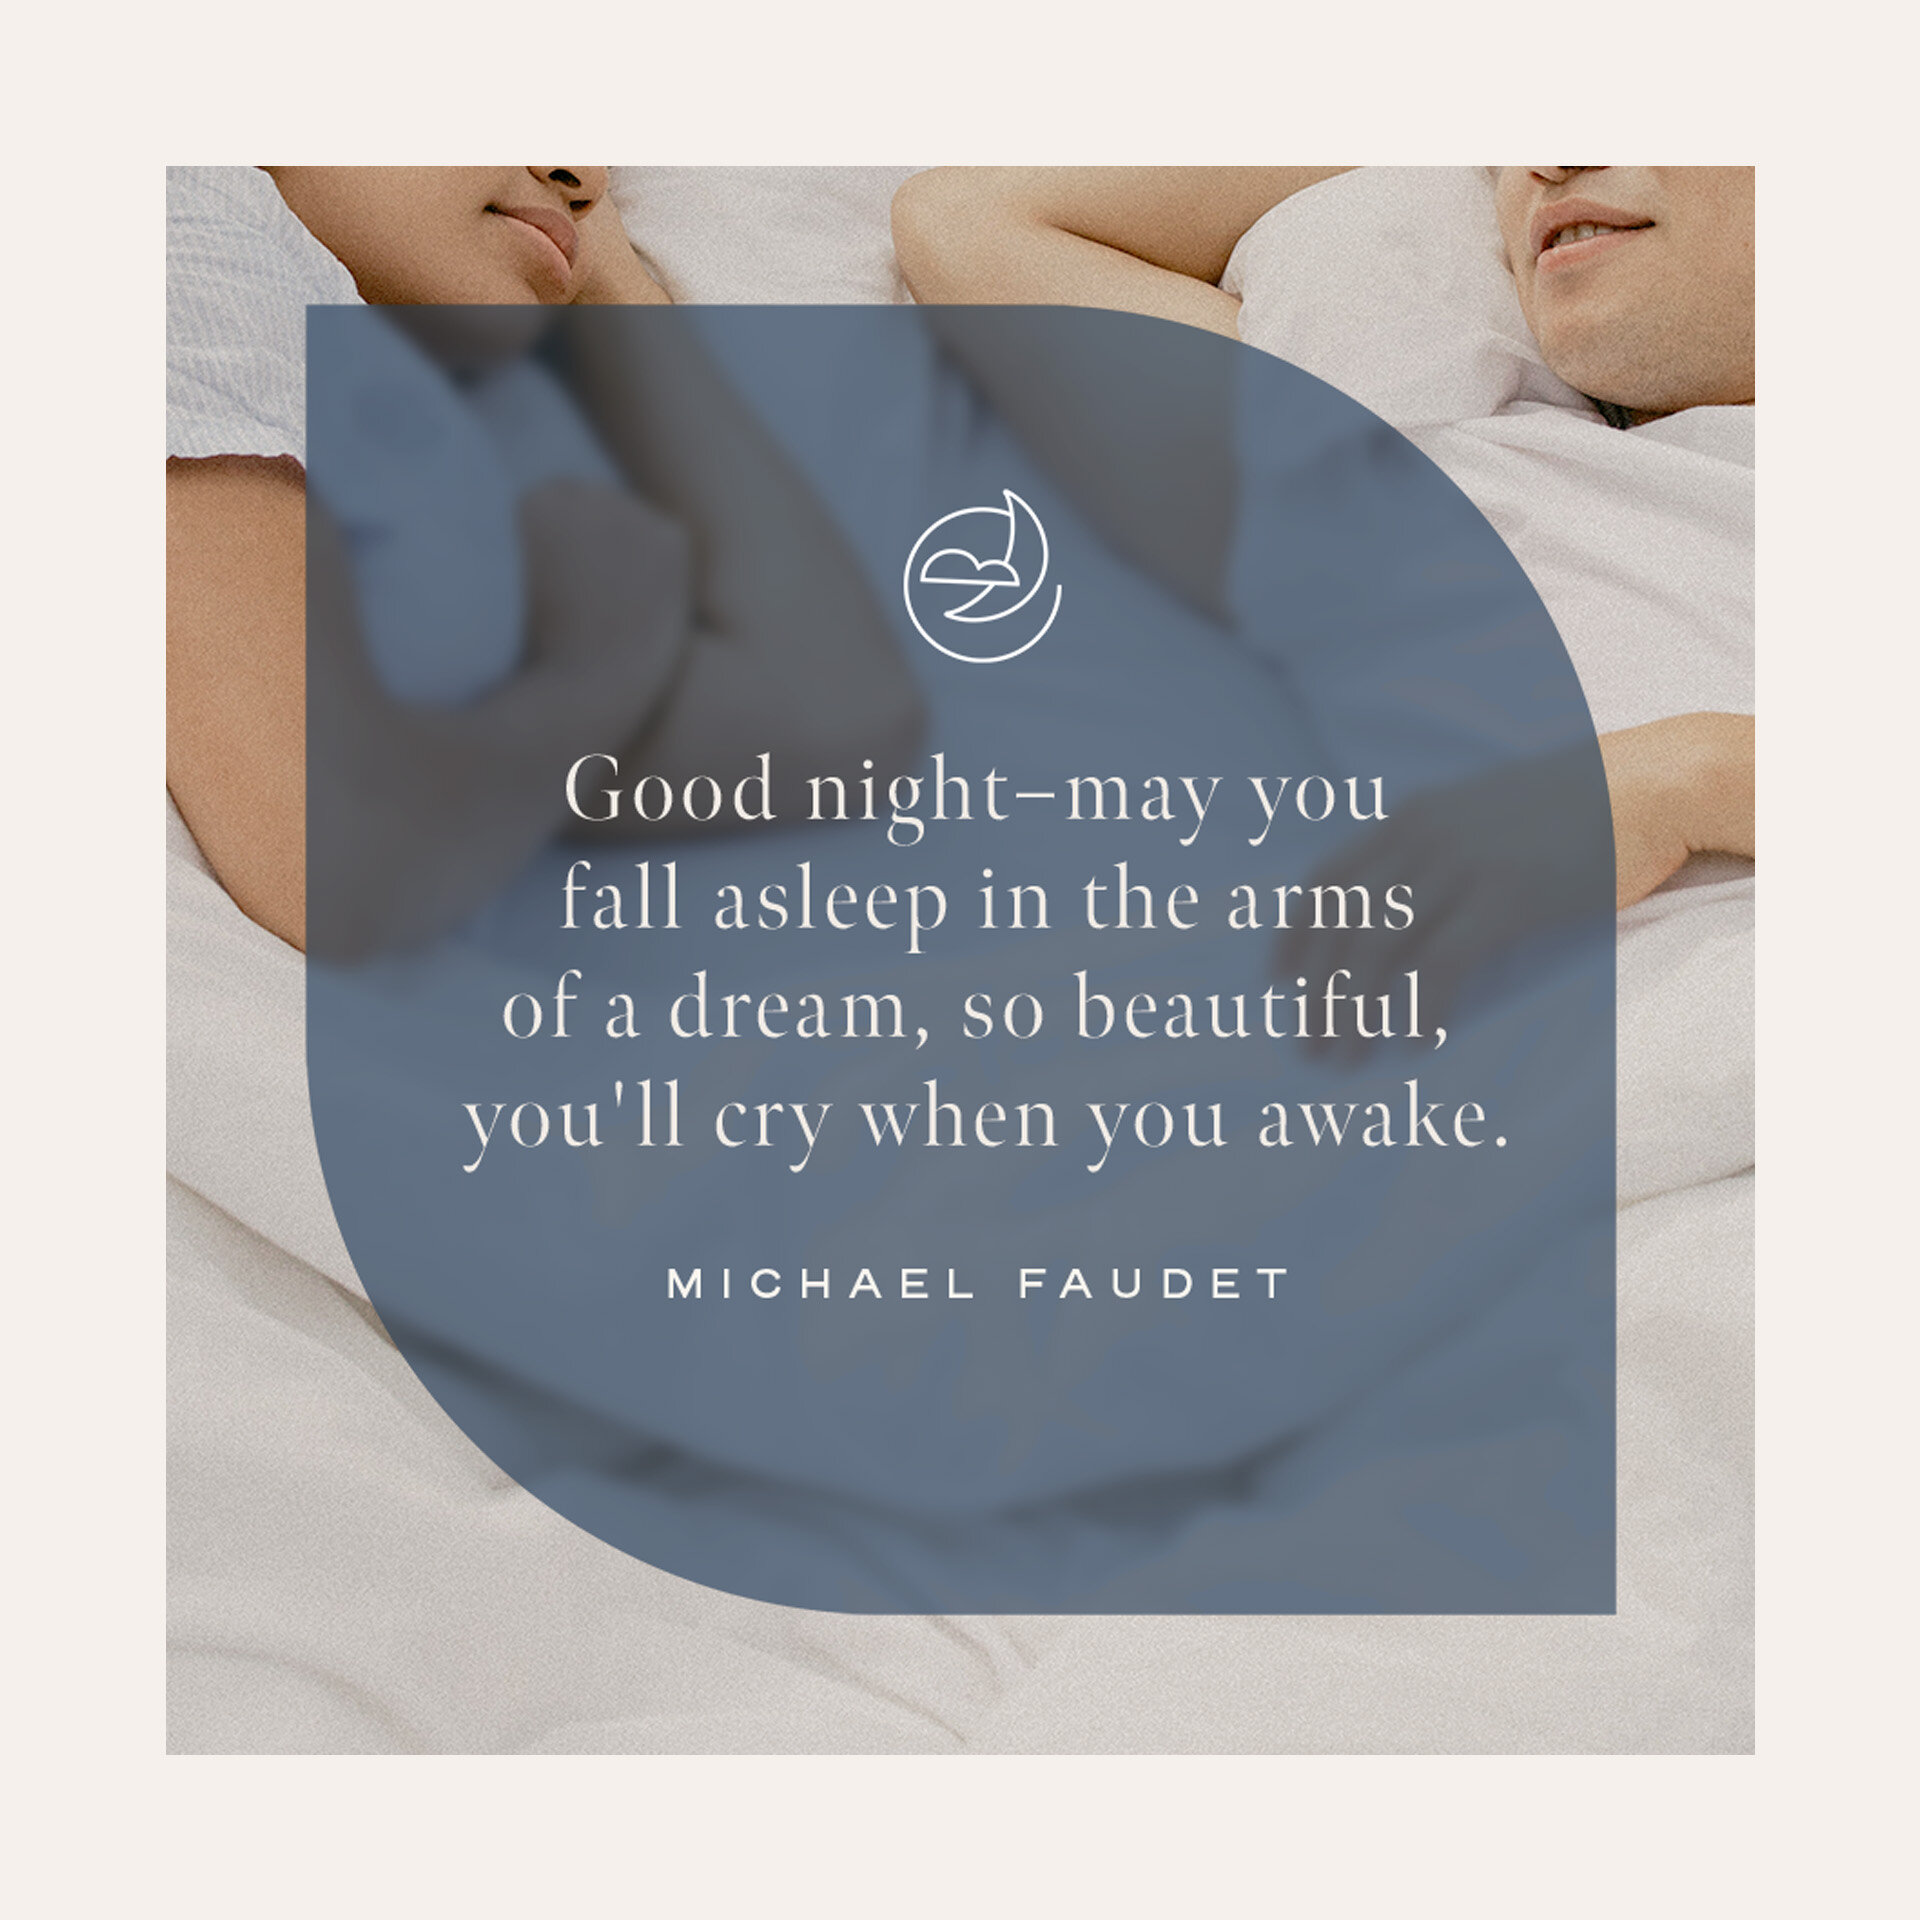 Dream quotes for good rest (and then get a FREE box of Sleep patches when you buy one. Use code: BOGOSLEEP). 💤

#breatherapy #breatherapytabs #breatherapypatches #essentialoil #essentialoils #pureessentialoils #essentialoiltab #essentialoilpatch #ar